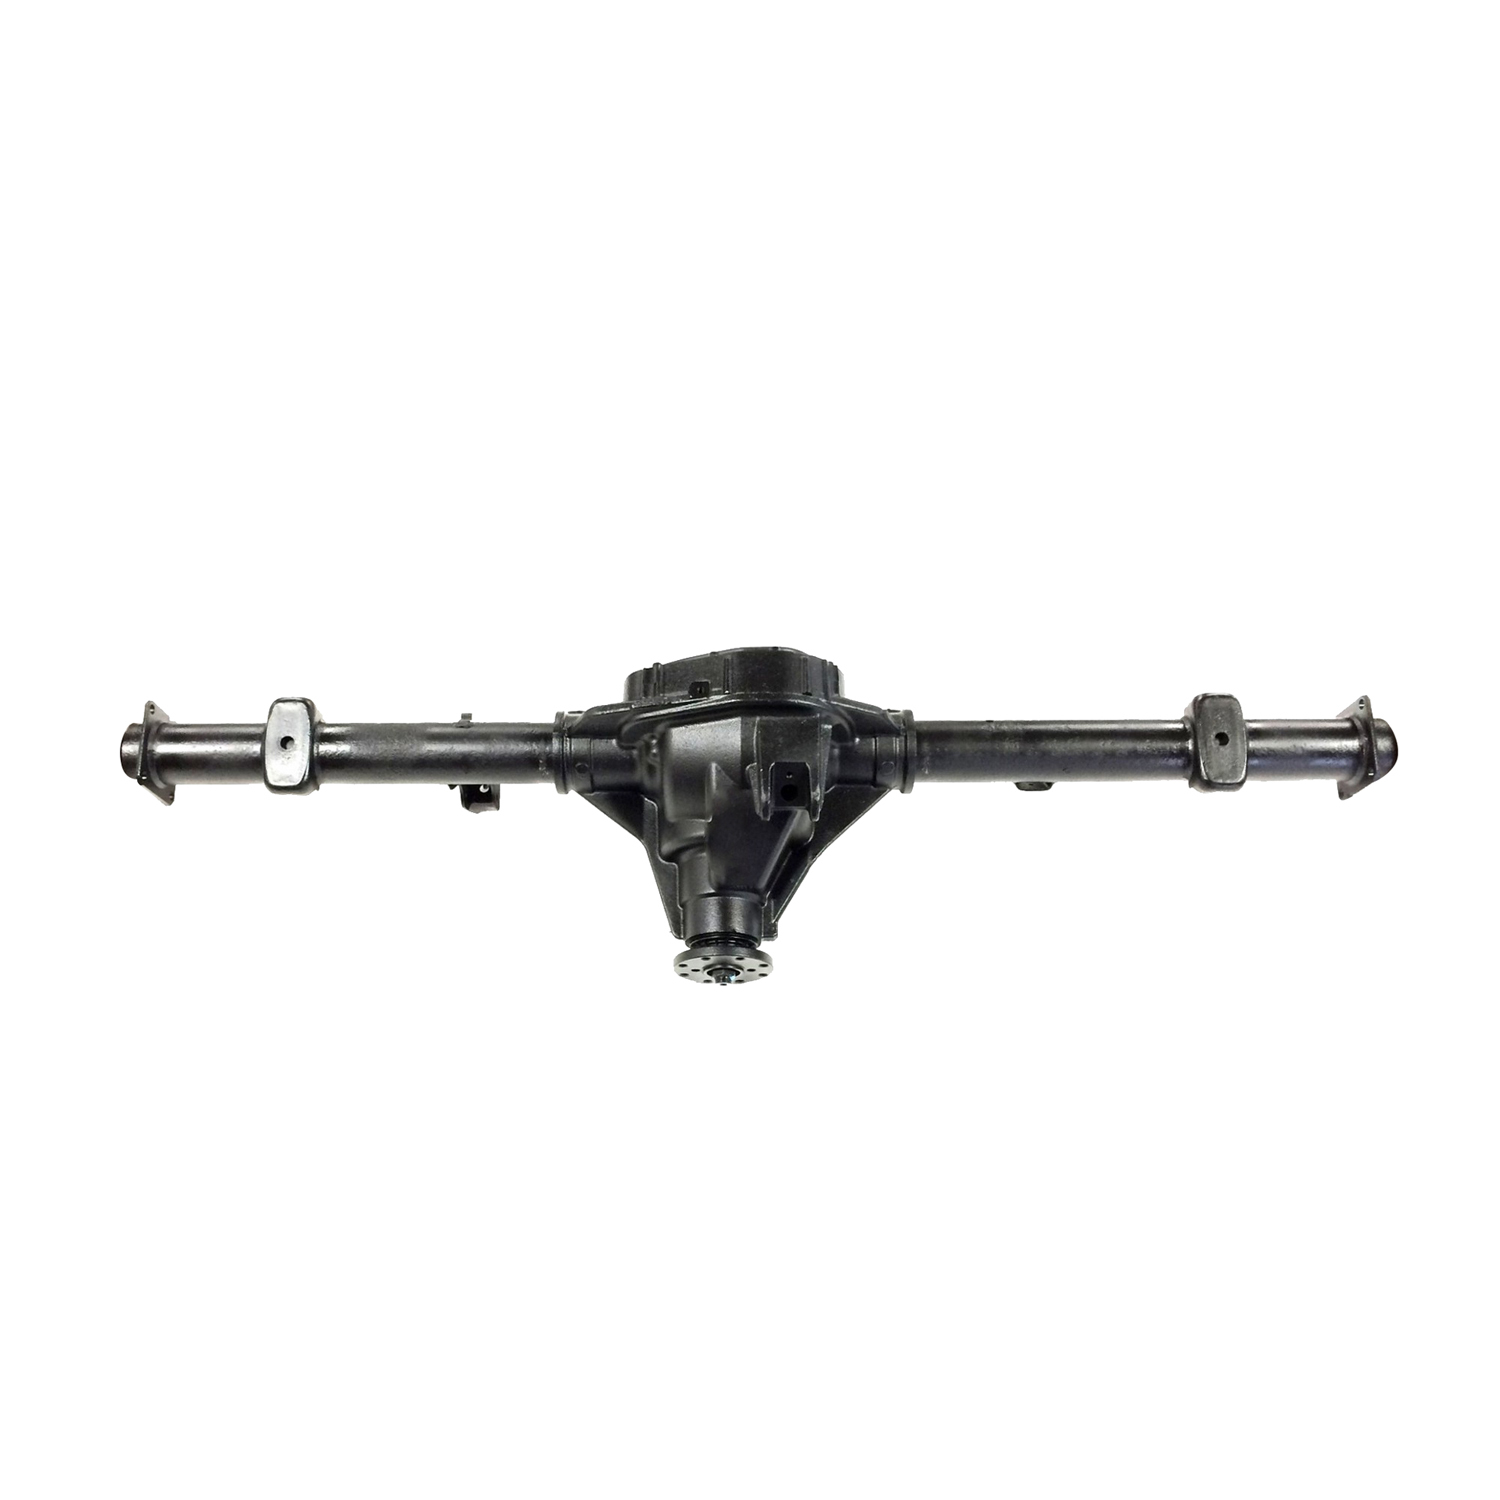 Reman Axle Assembly for Ford 9.75" 02-03 Ford E150 3.55 Ratio Disc